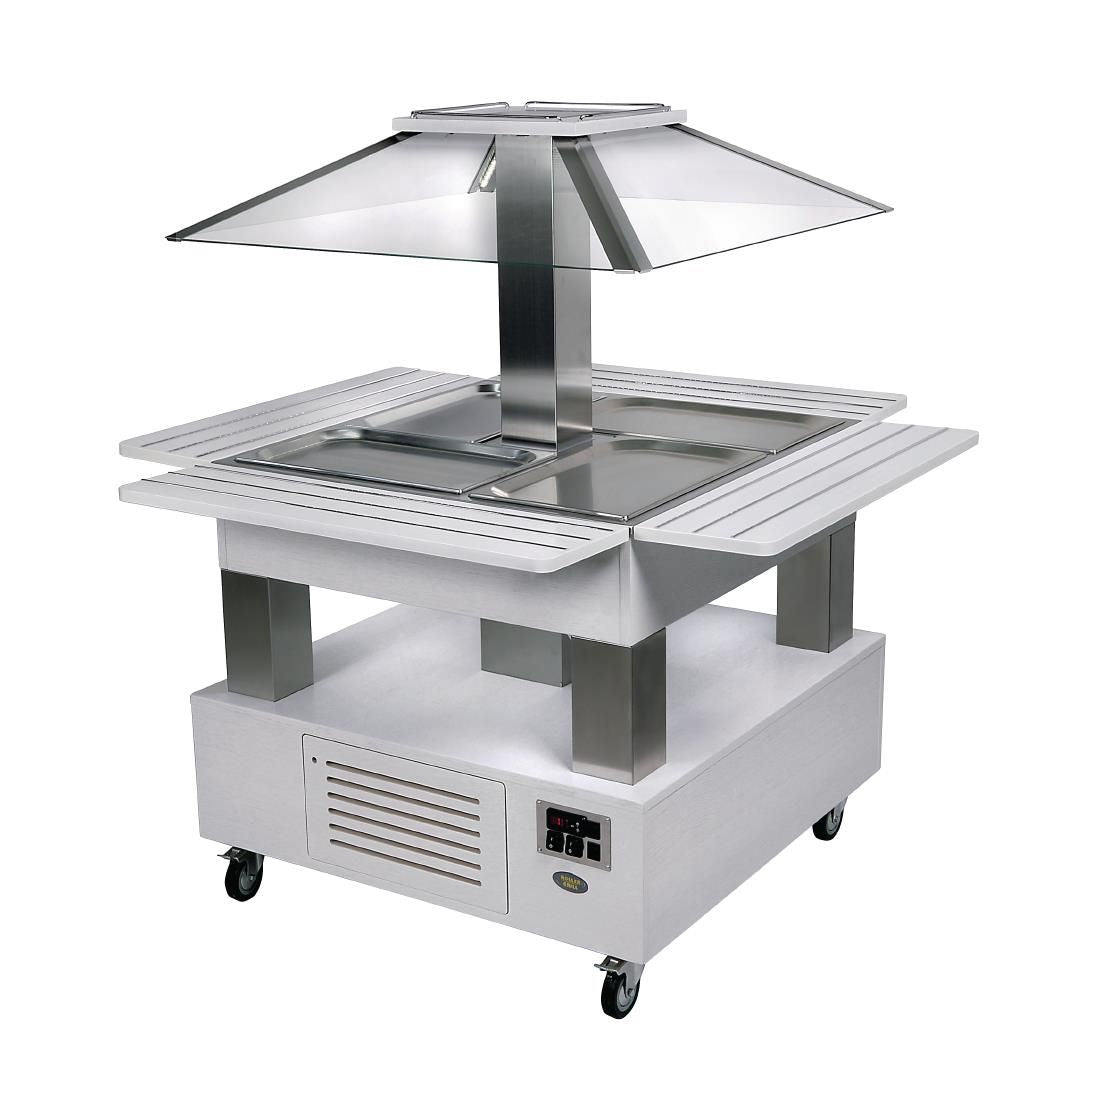 GP306 Roller Grill Chilled Salad Bar Square White Wood GP306